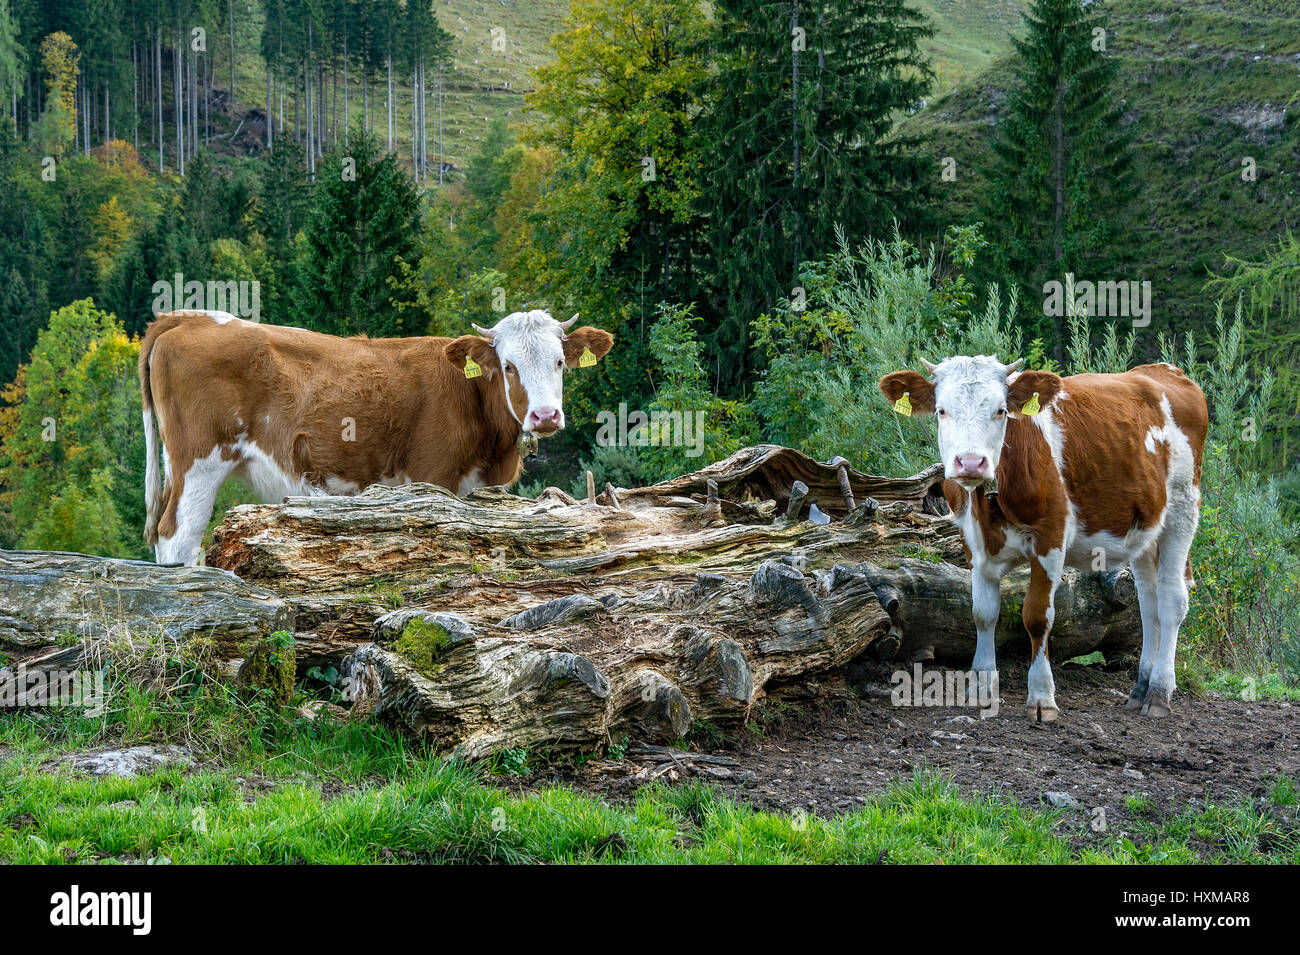 Cattle (Bos primigenius taurus), Fleckvieh cattle, young animals on pasture, Aggenalm, Sudelfeld, Mangfall mountains Stock Photo